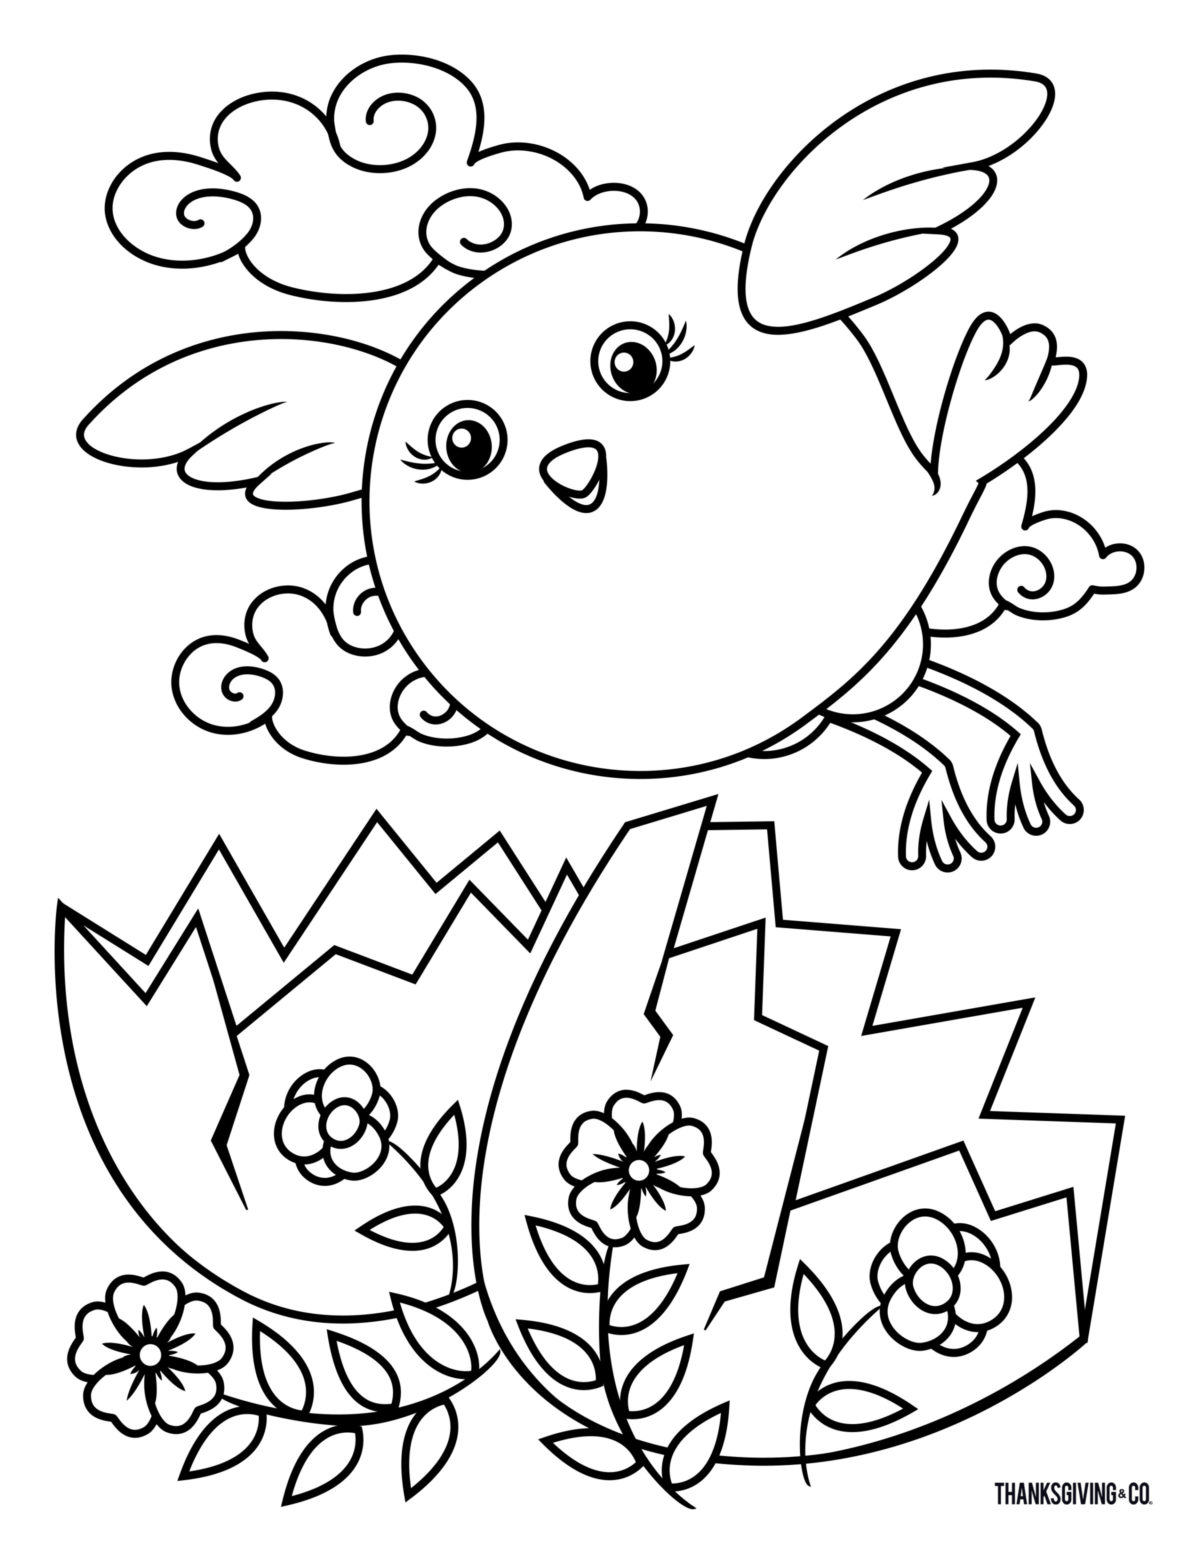 8 Free Printable Easter Coloring Pages Your Kids Will Love